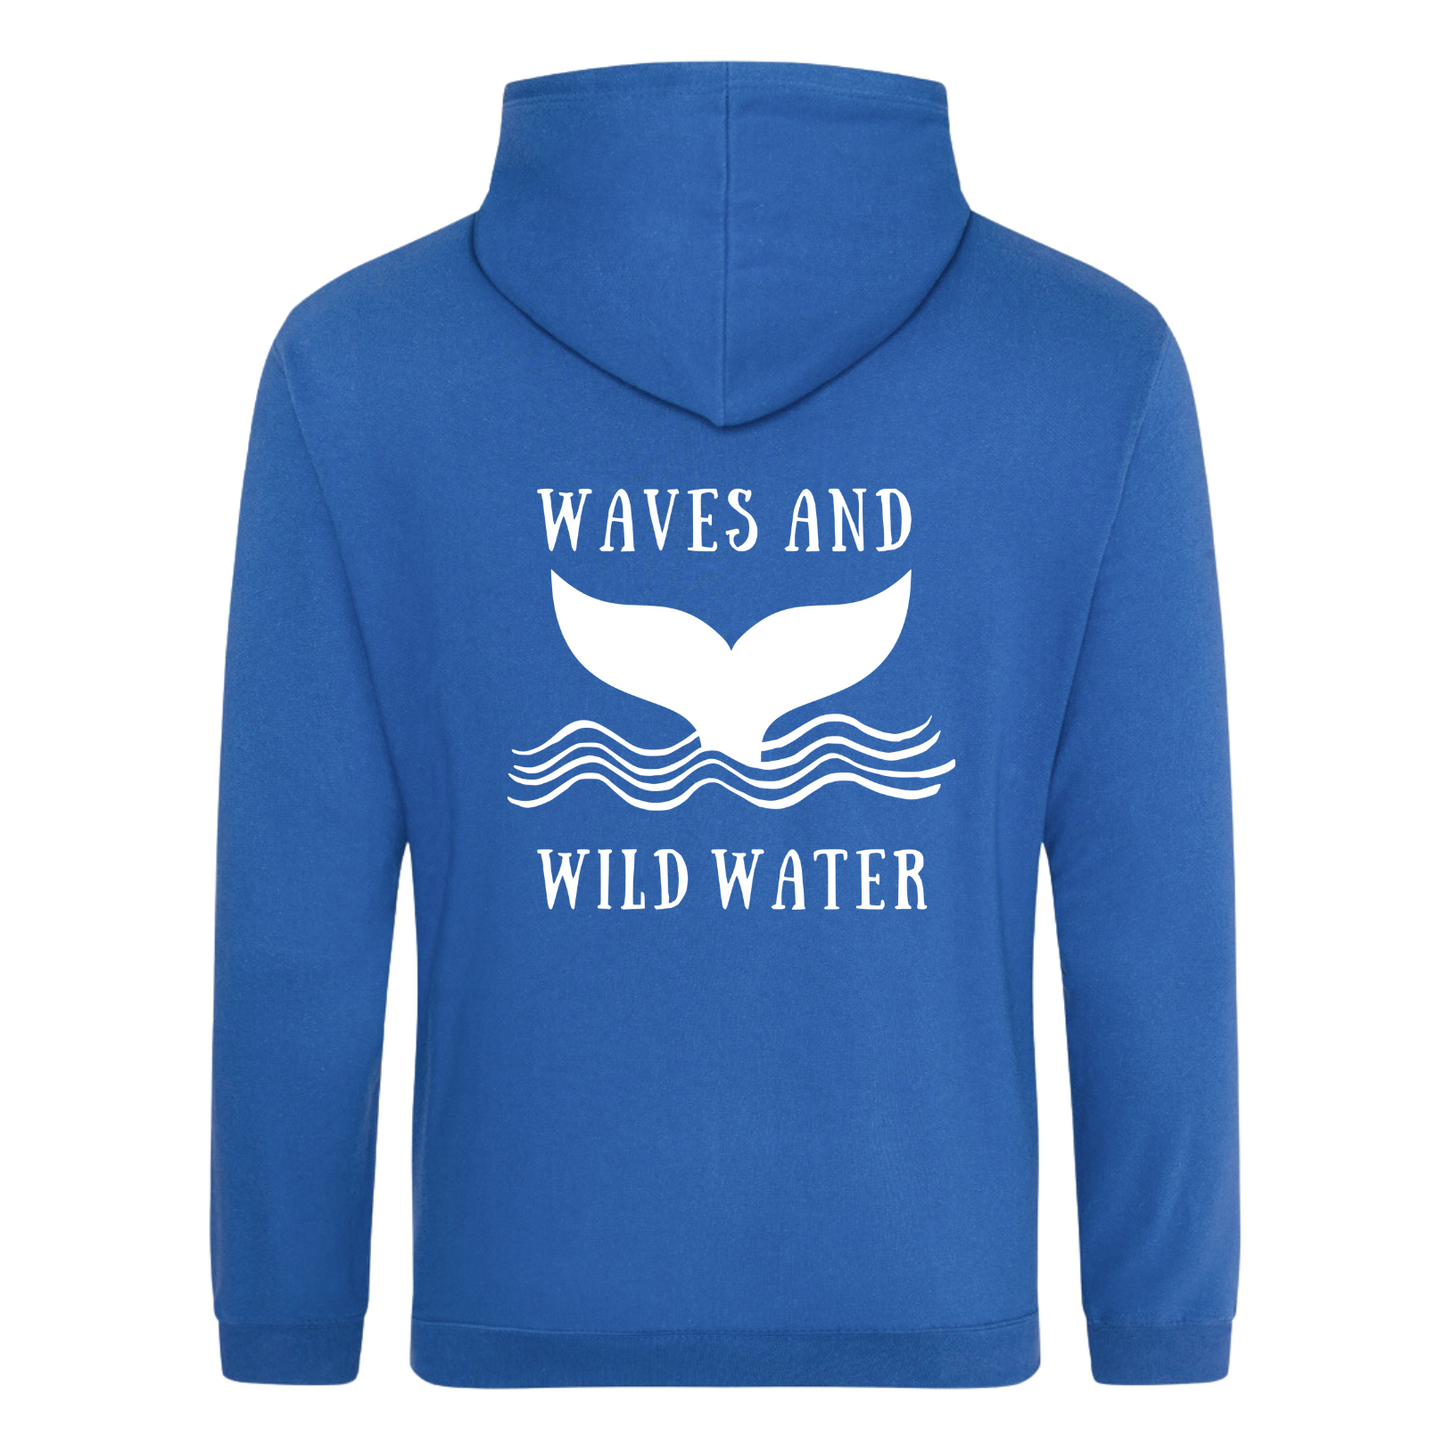 The back of the Waves and Wild Water ocean blue hoodie showing the large whale tail logo coming out of the waves. The logo is hand printed in white vegan ink and contrasts perfectly with the ocean blue of the hoodie, making this the go to choice for wild  simmers and sea dippers.